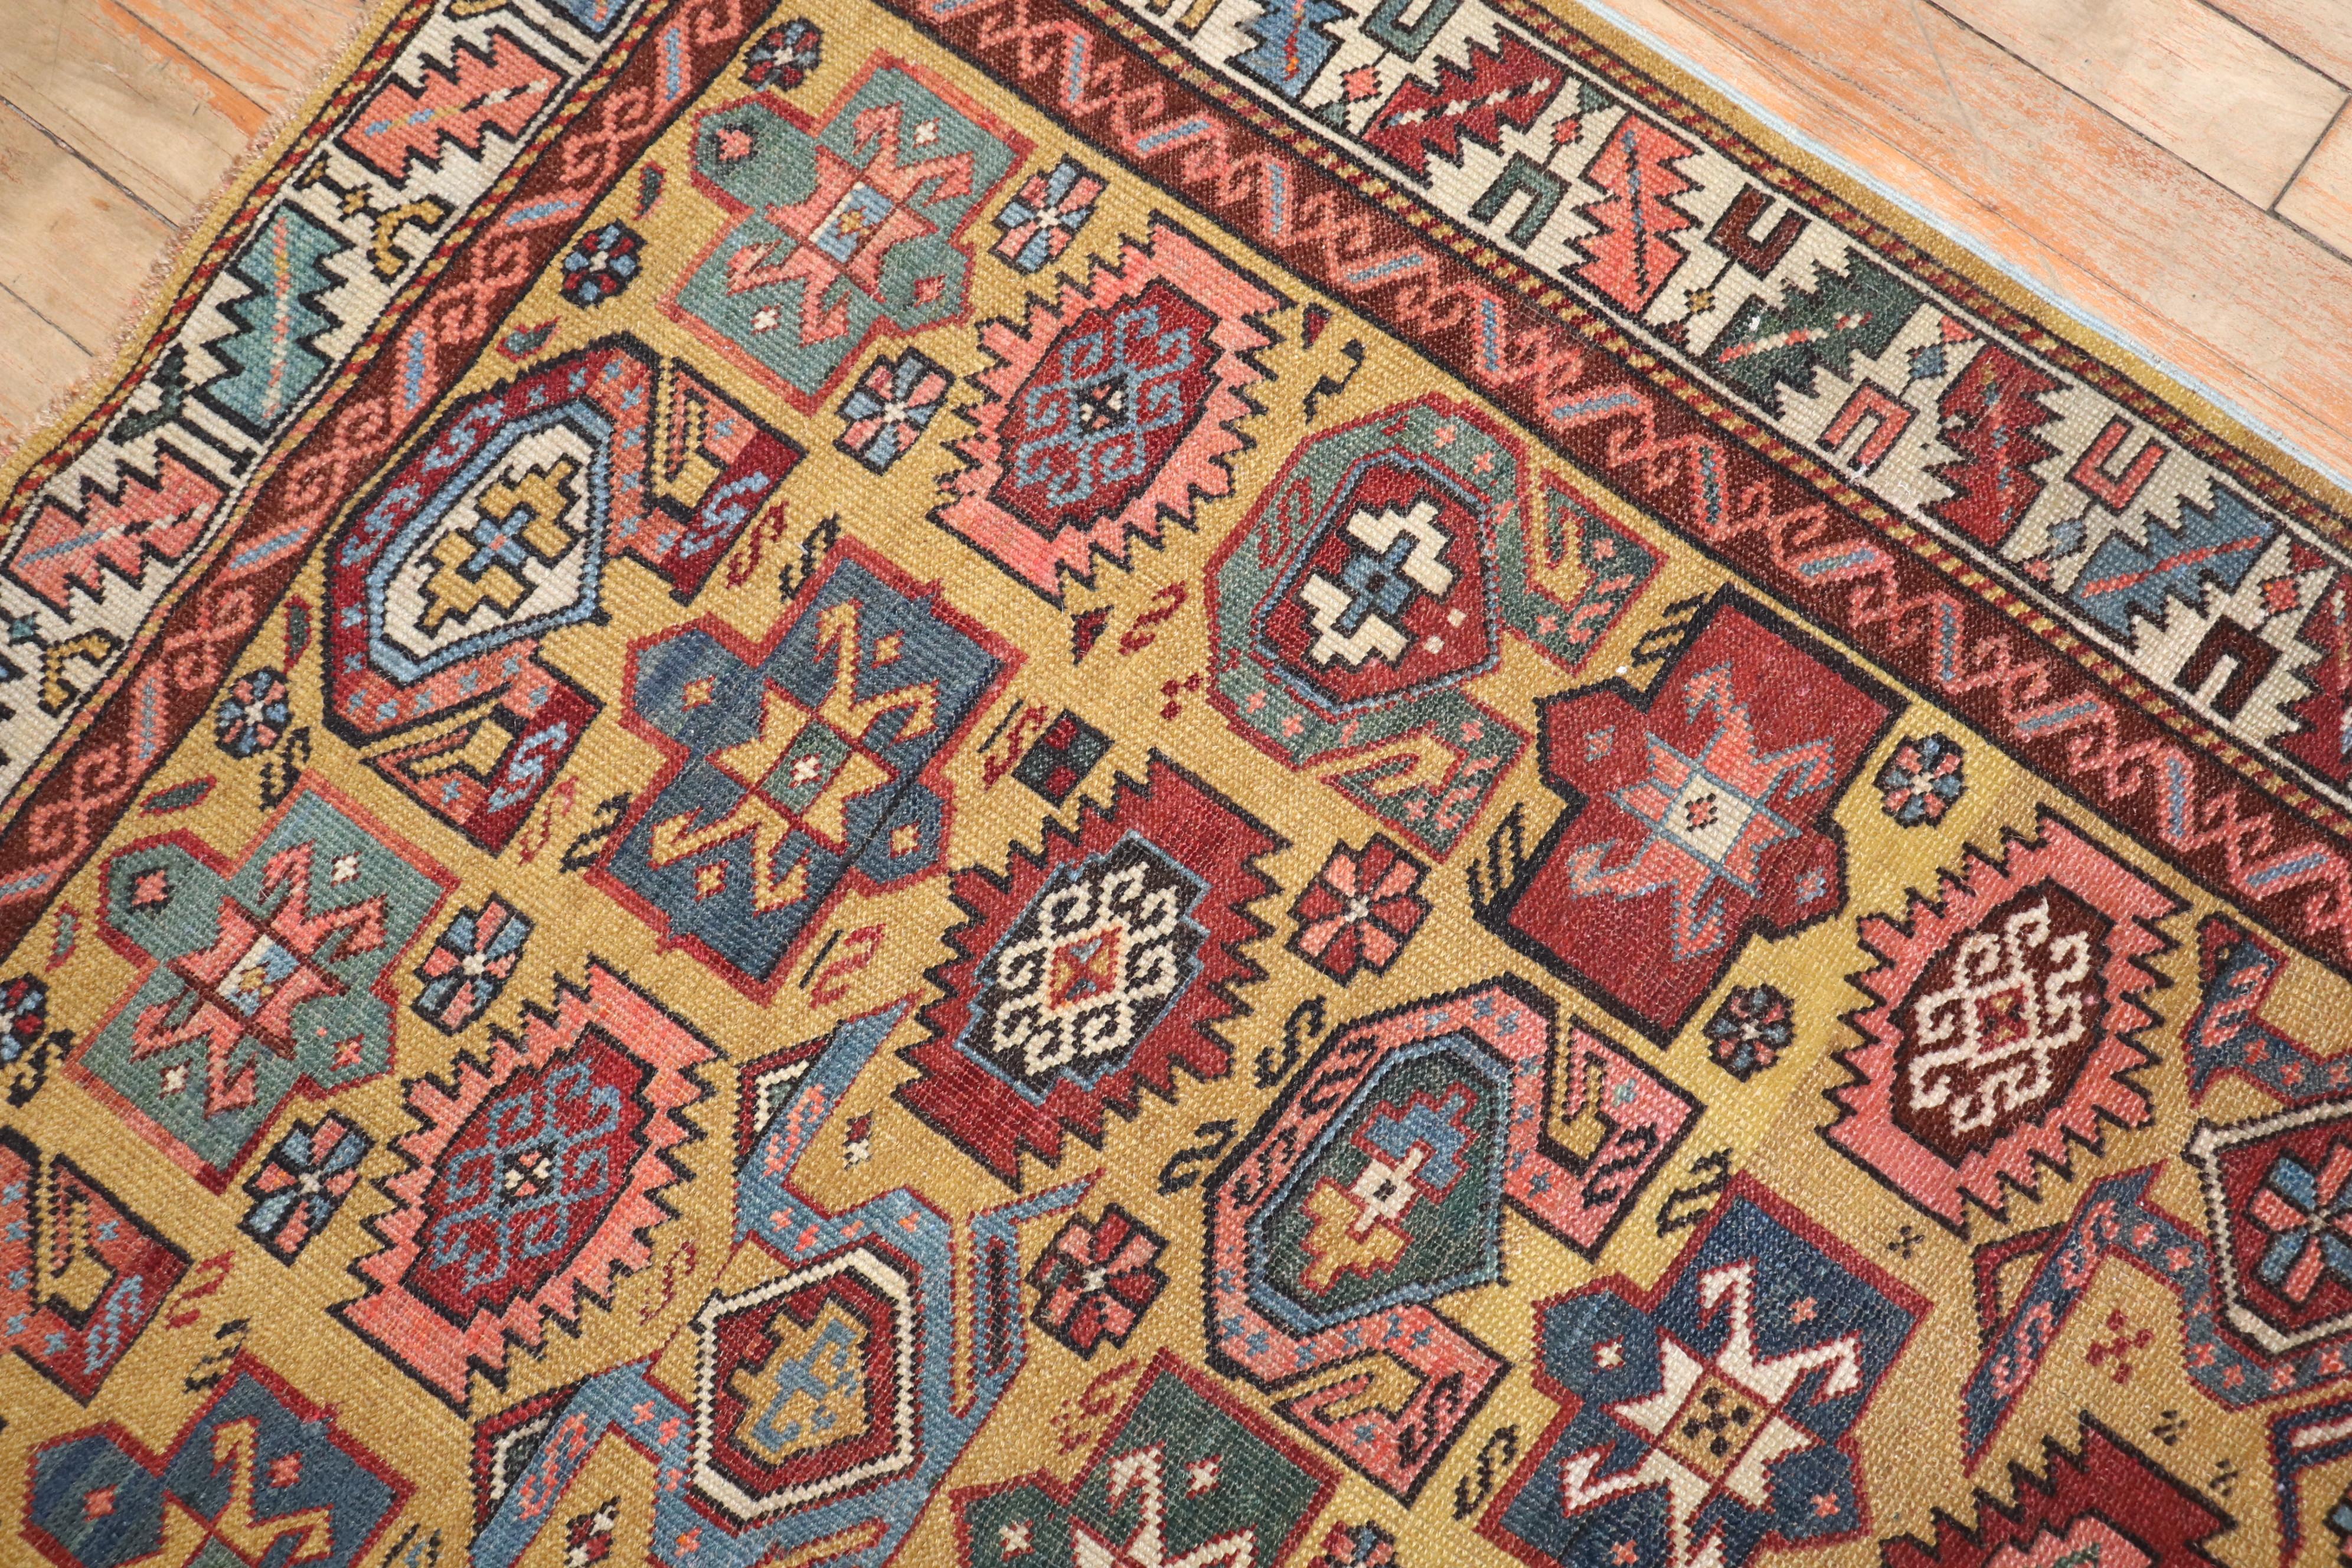 Late 19th century Mustard Yellow Caucasian Kuba Rug  In Good Condition For Sale In New York, NY